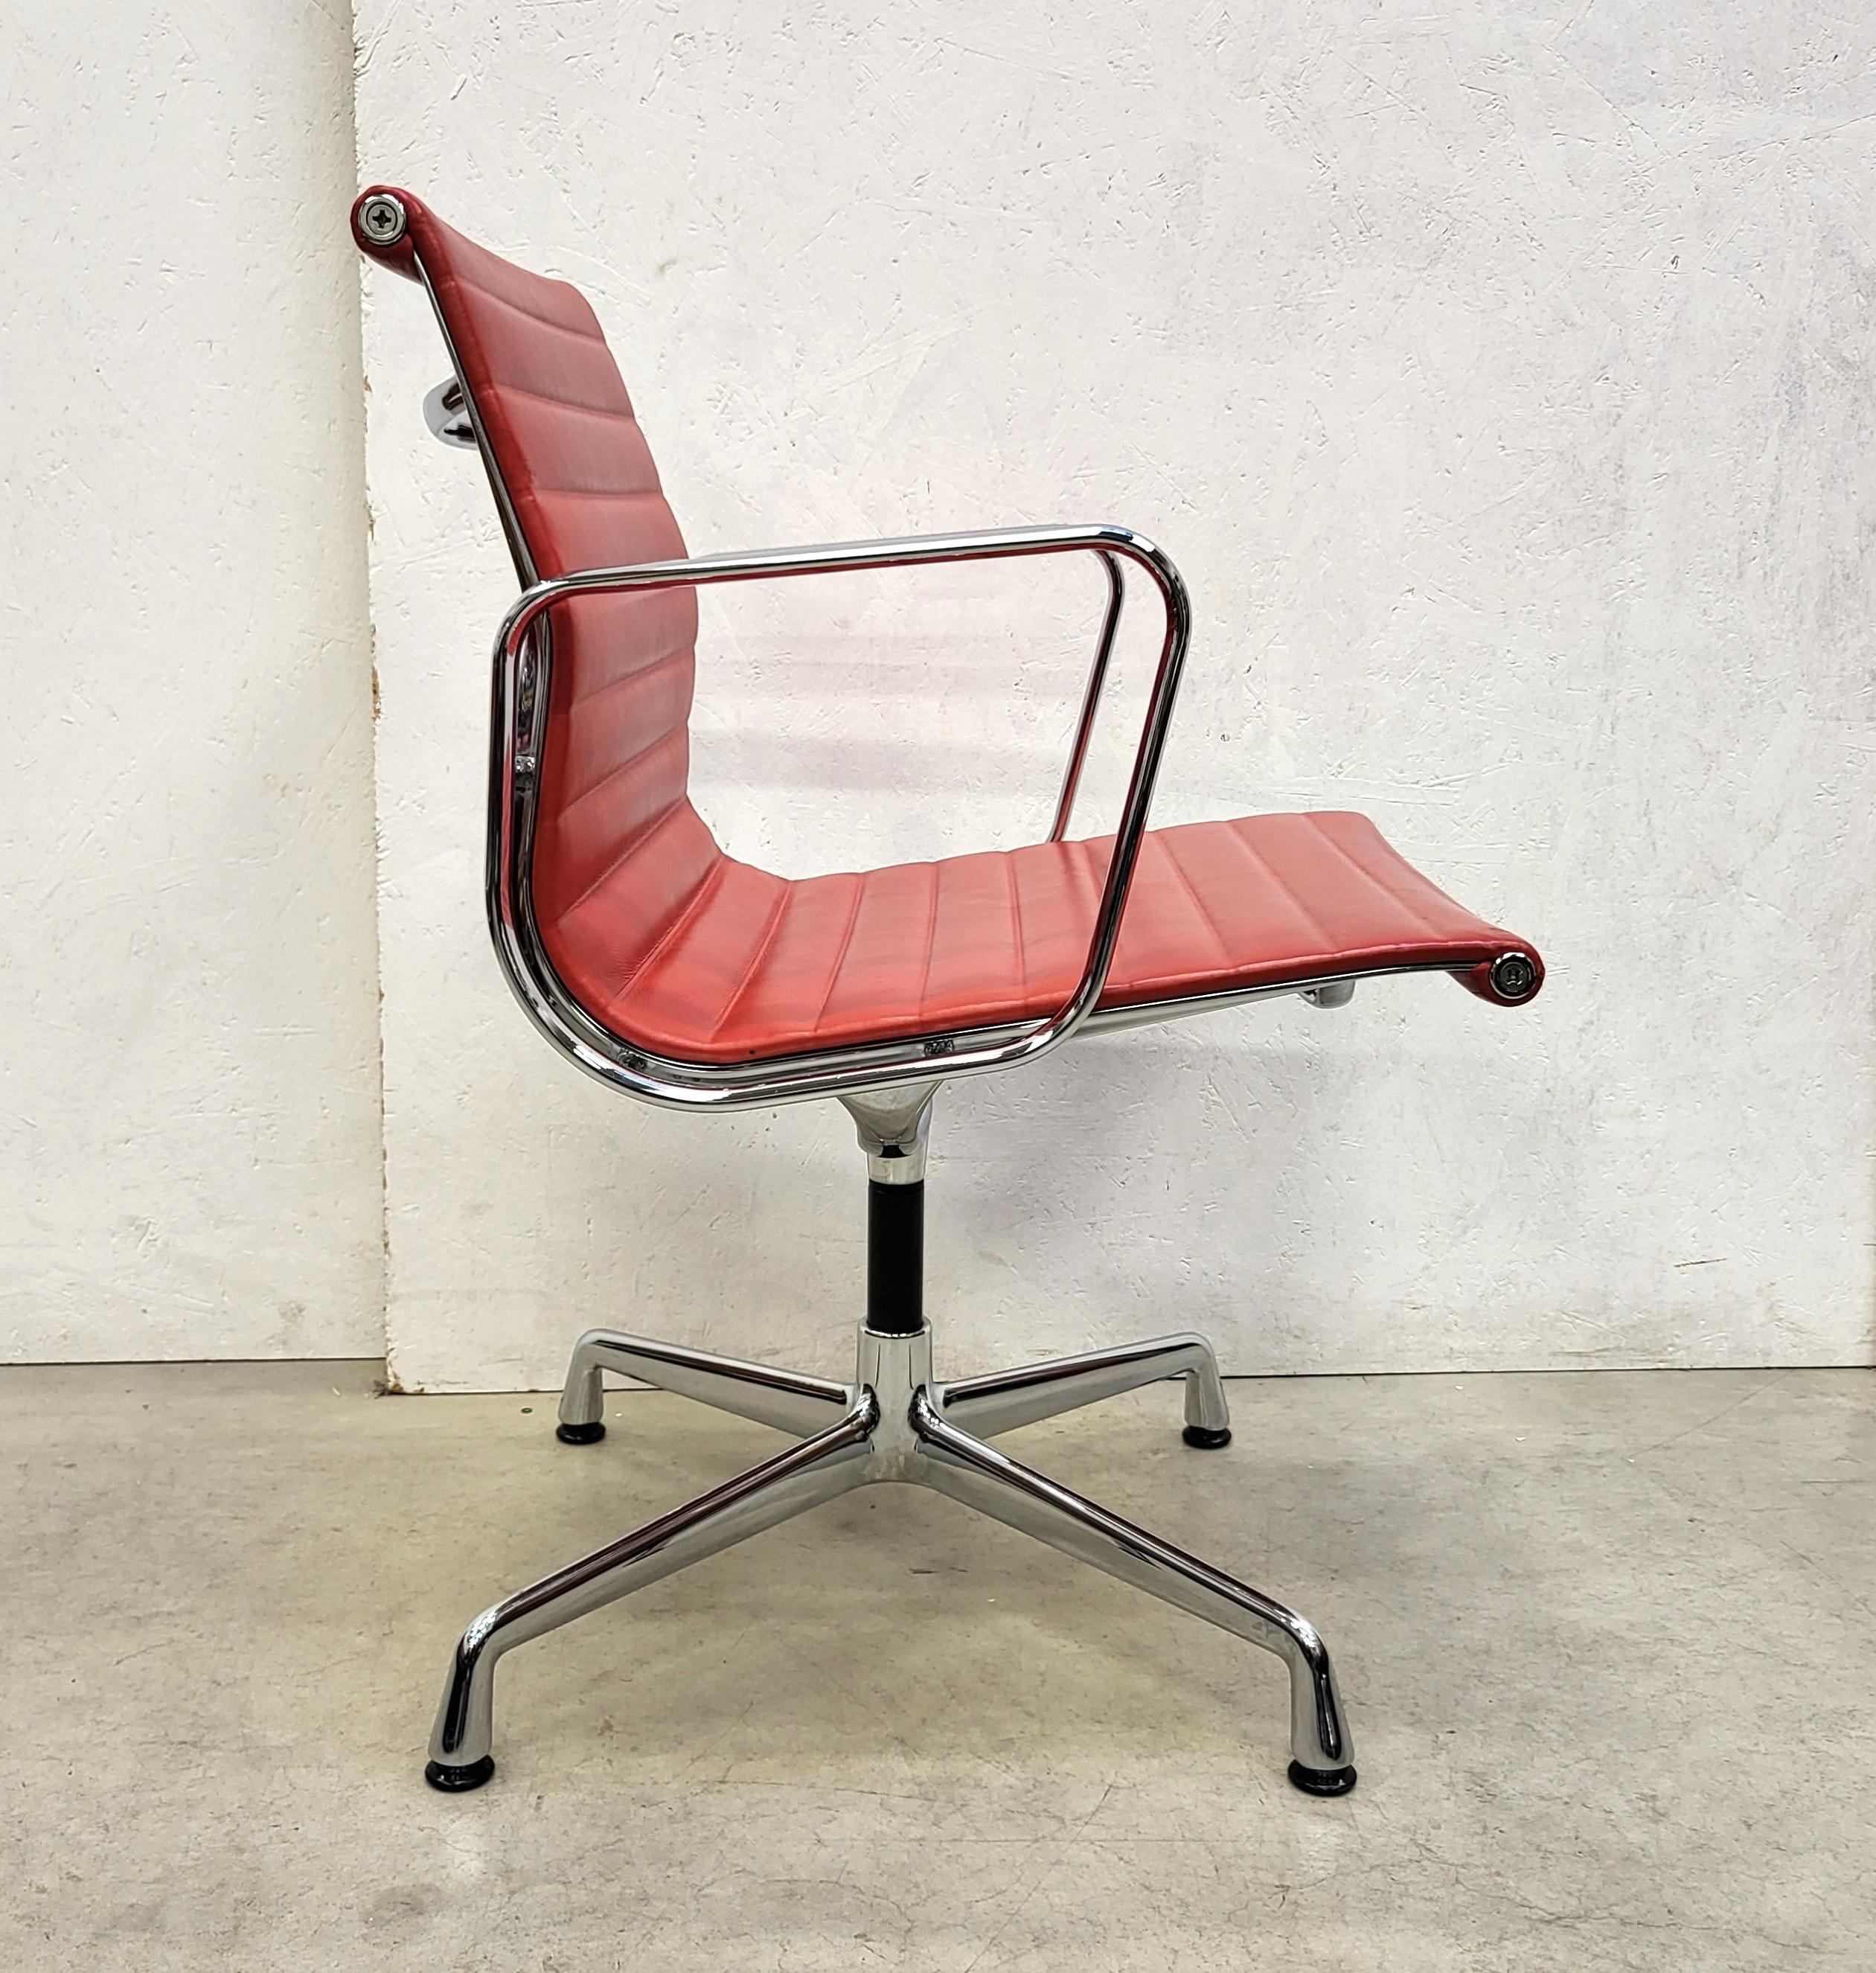 German Vitra Ea108 Aluminium Chair by Charles Eames Red Leather, Set of 4